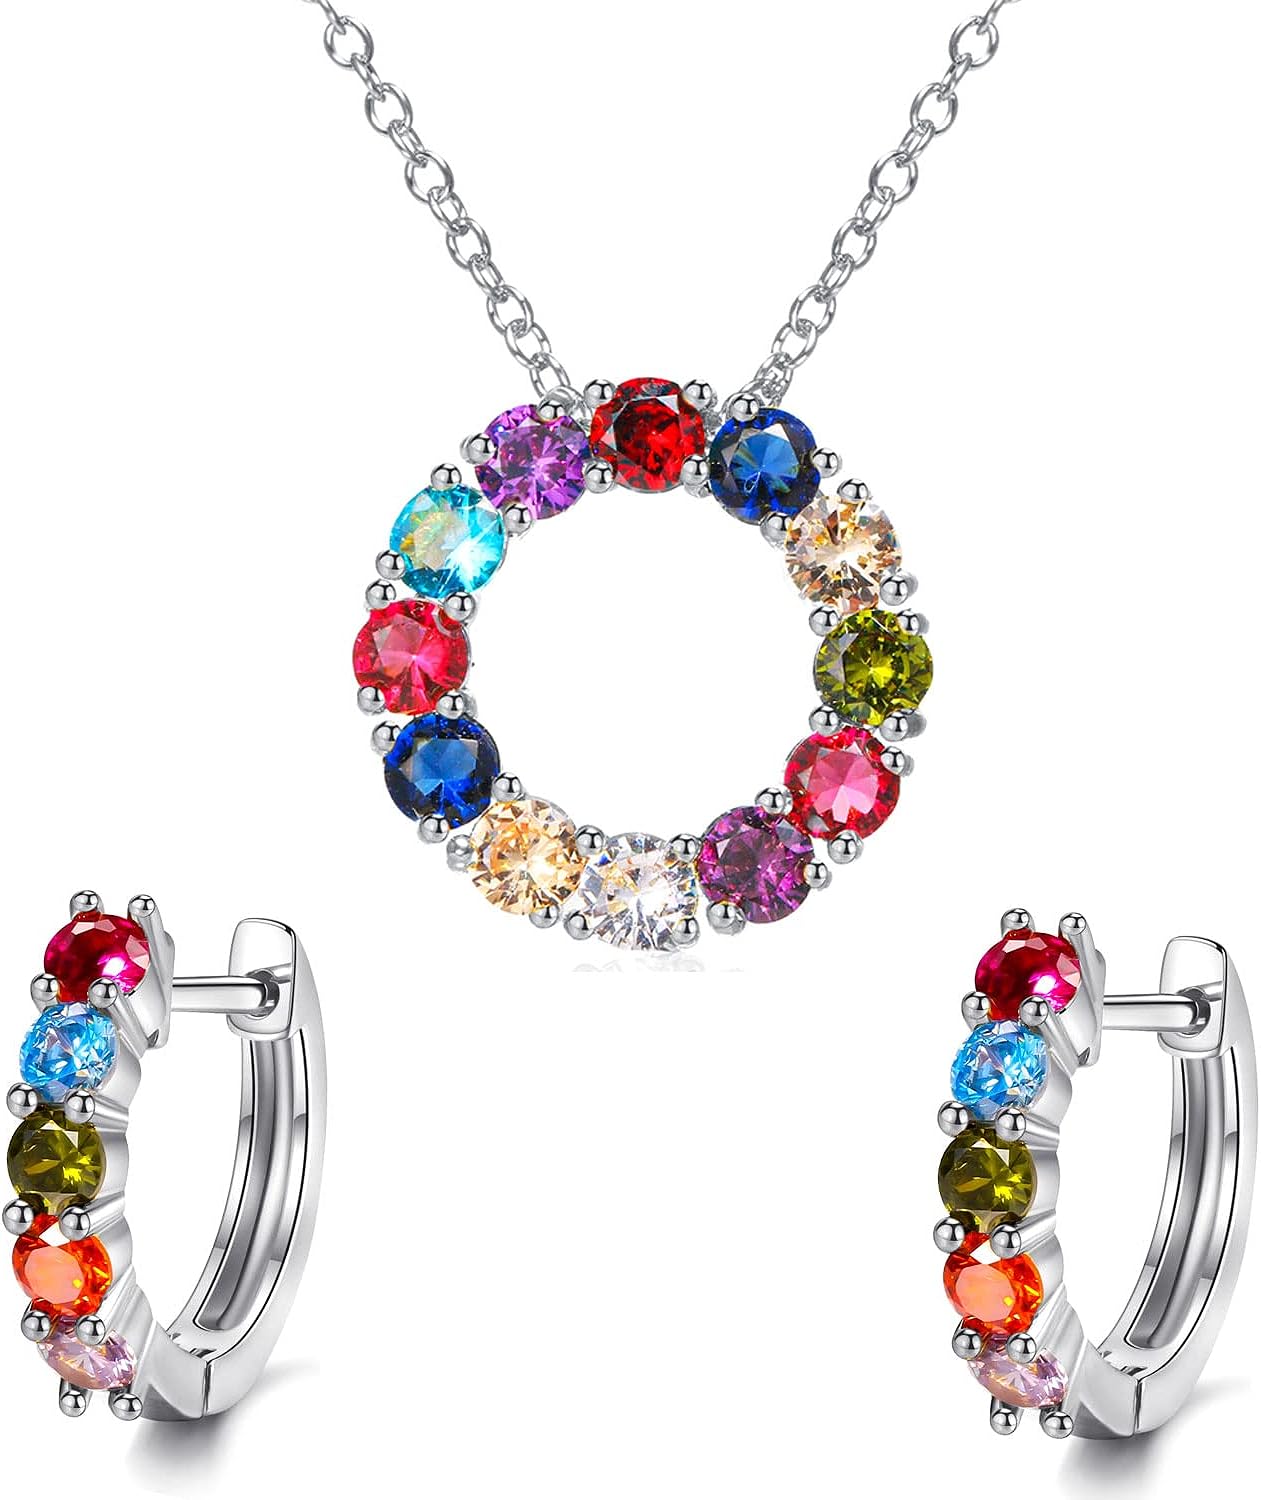 QIXINWANG Colorful Gems Necklaces and Earrings Jewelry Sets, Anniversary, Birthday, Mother’s Day Jewelry Gifts for Women Wife, Mom, Best Friend